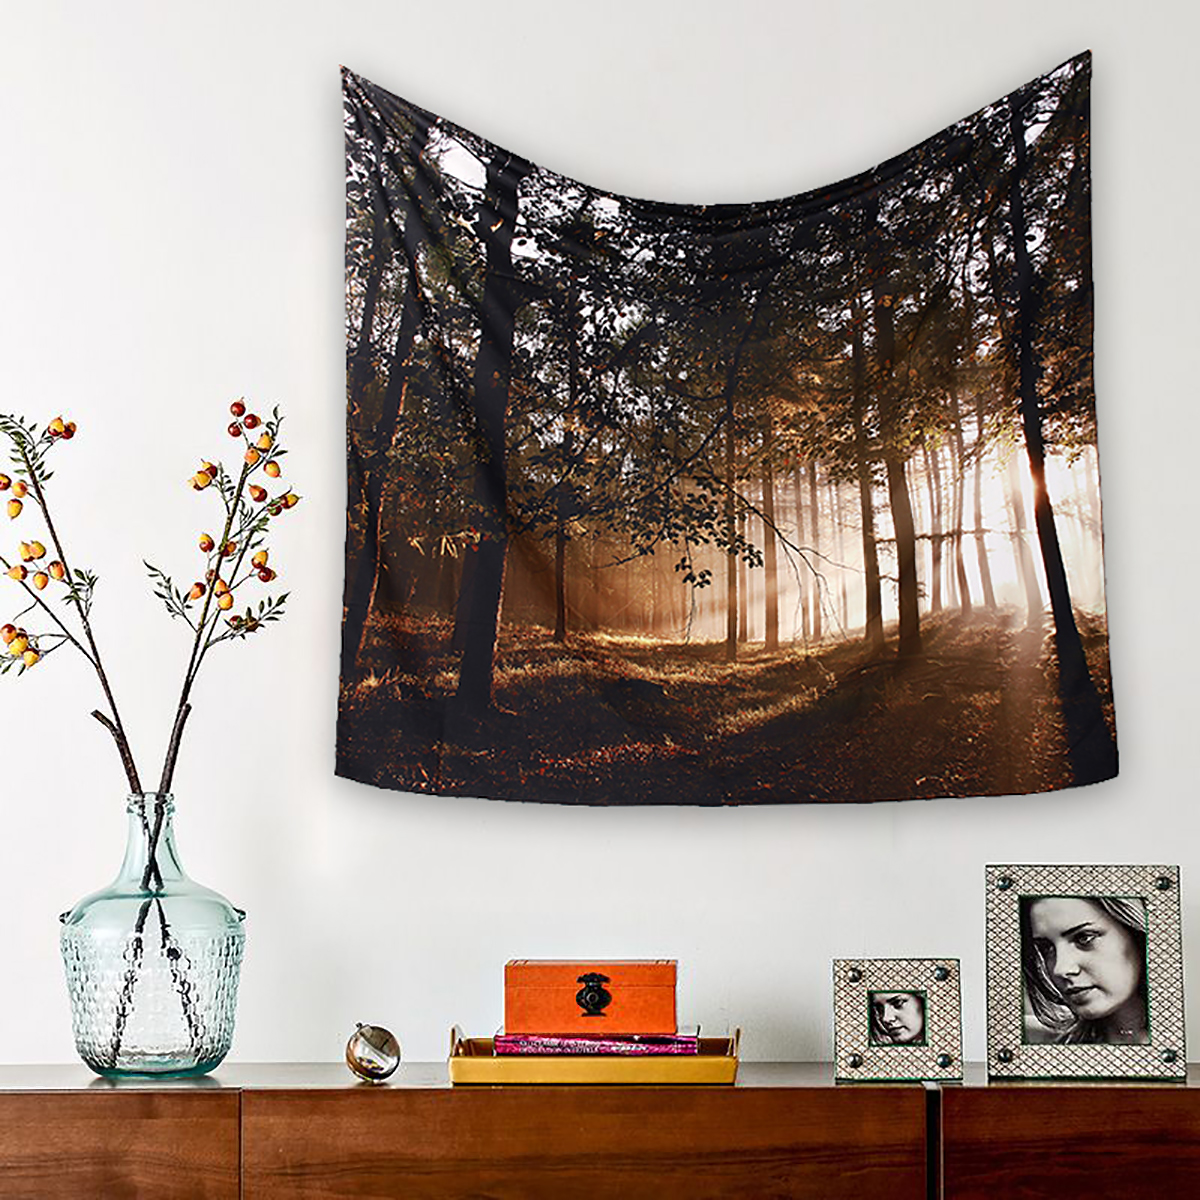 Forest-World-Map-Tapestries-Wall-Hanging-Paper-Tapestry-Bedspread-Dorm-Decor-1436138-3